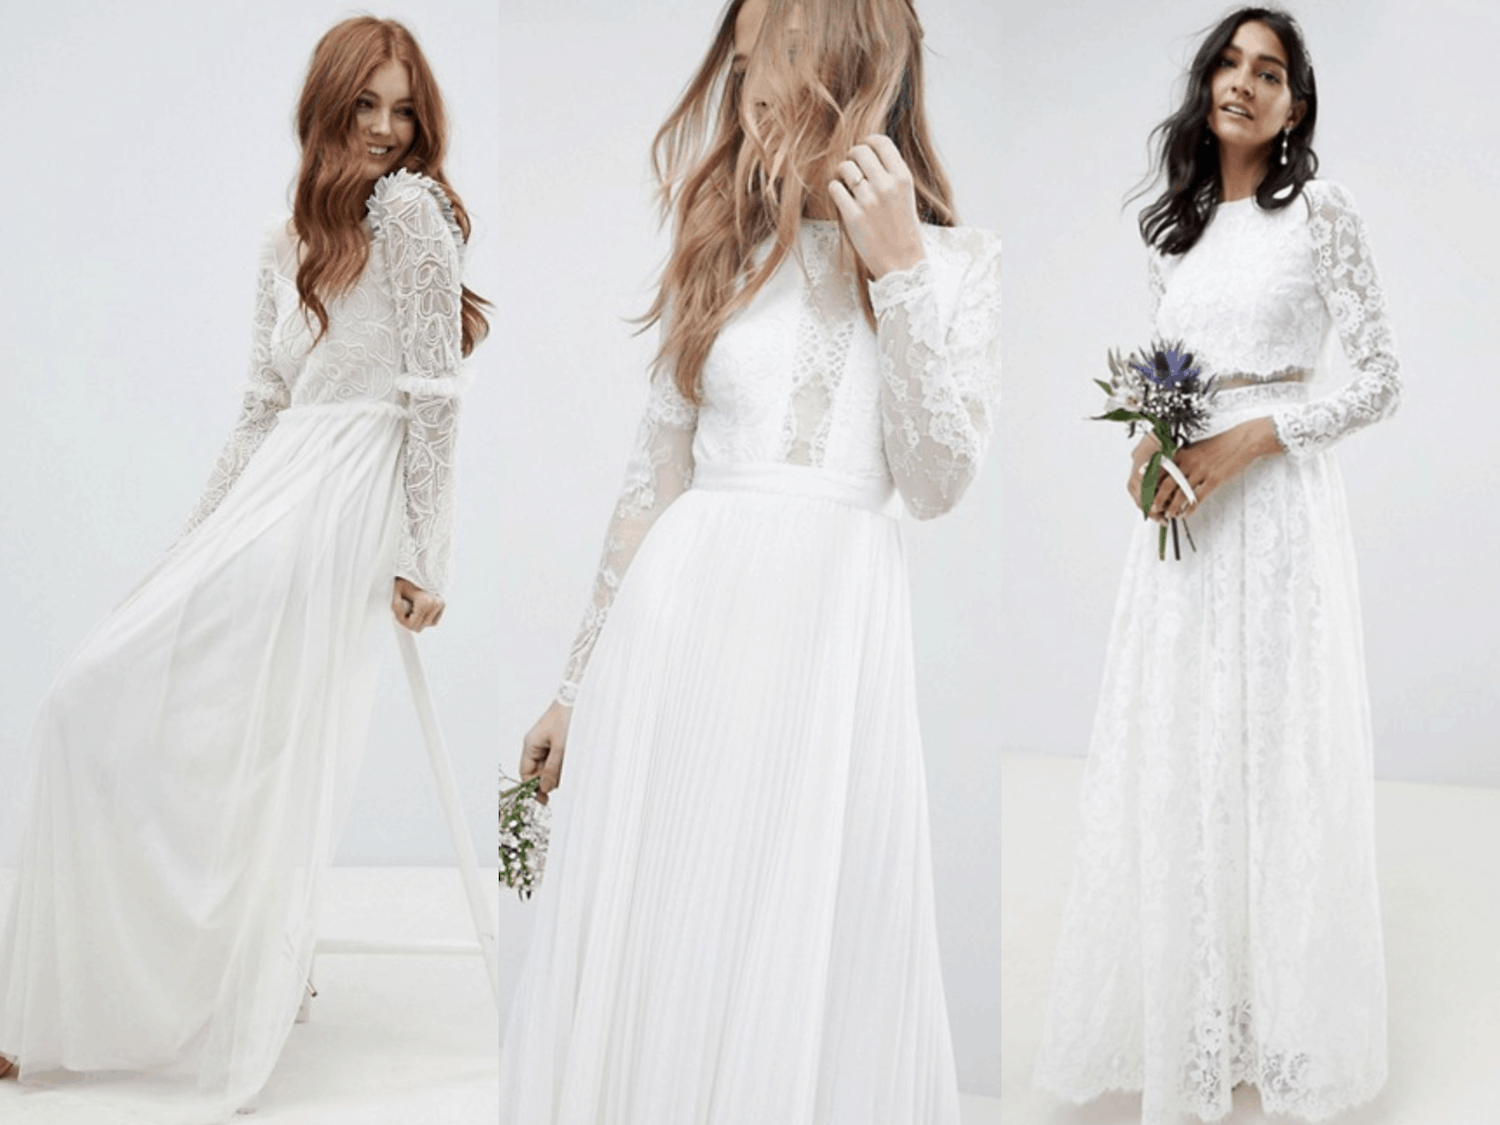 affordable dresses to wear to a wedding